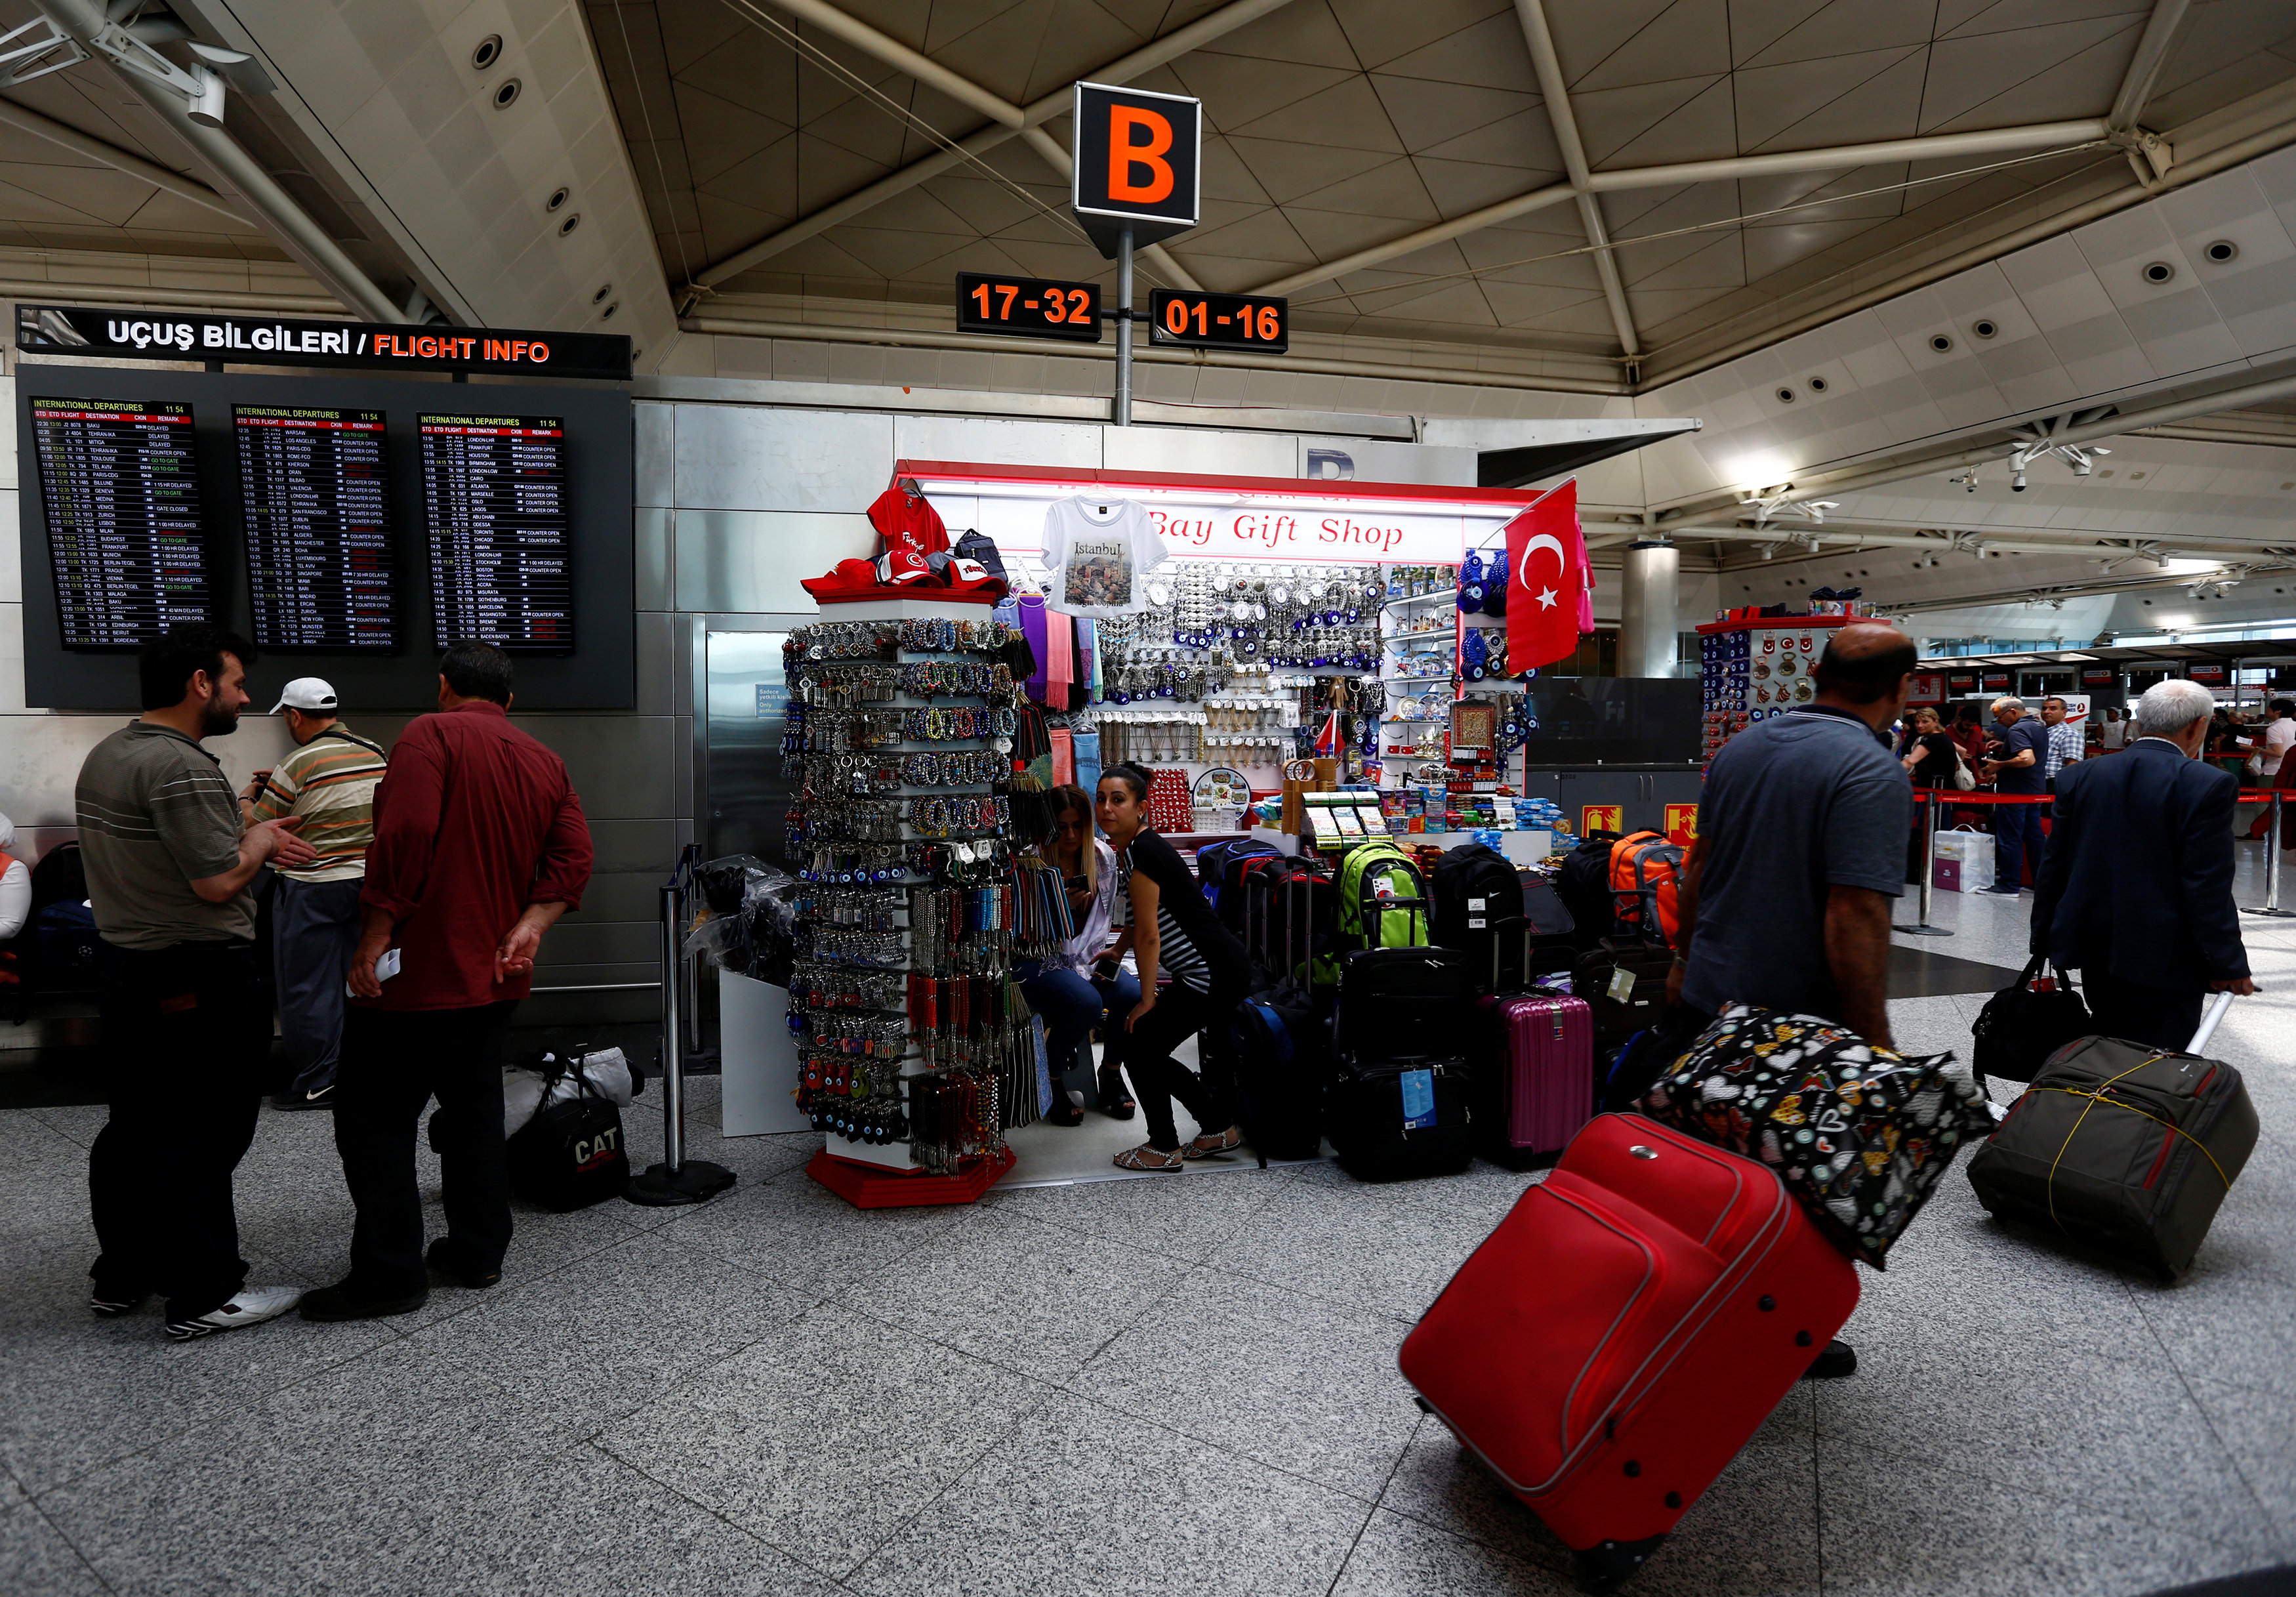 IS prime suspect after suicide bombers kill 41 at Istanbul airport